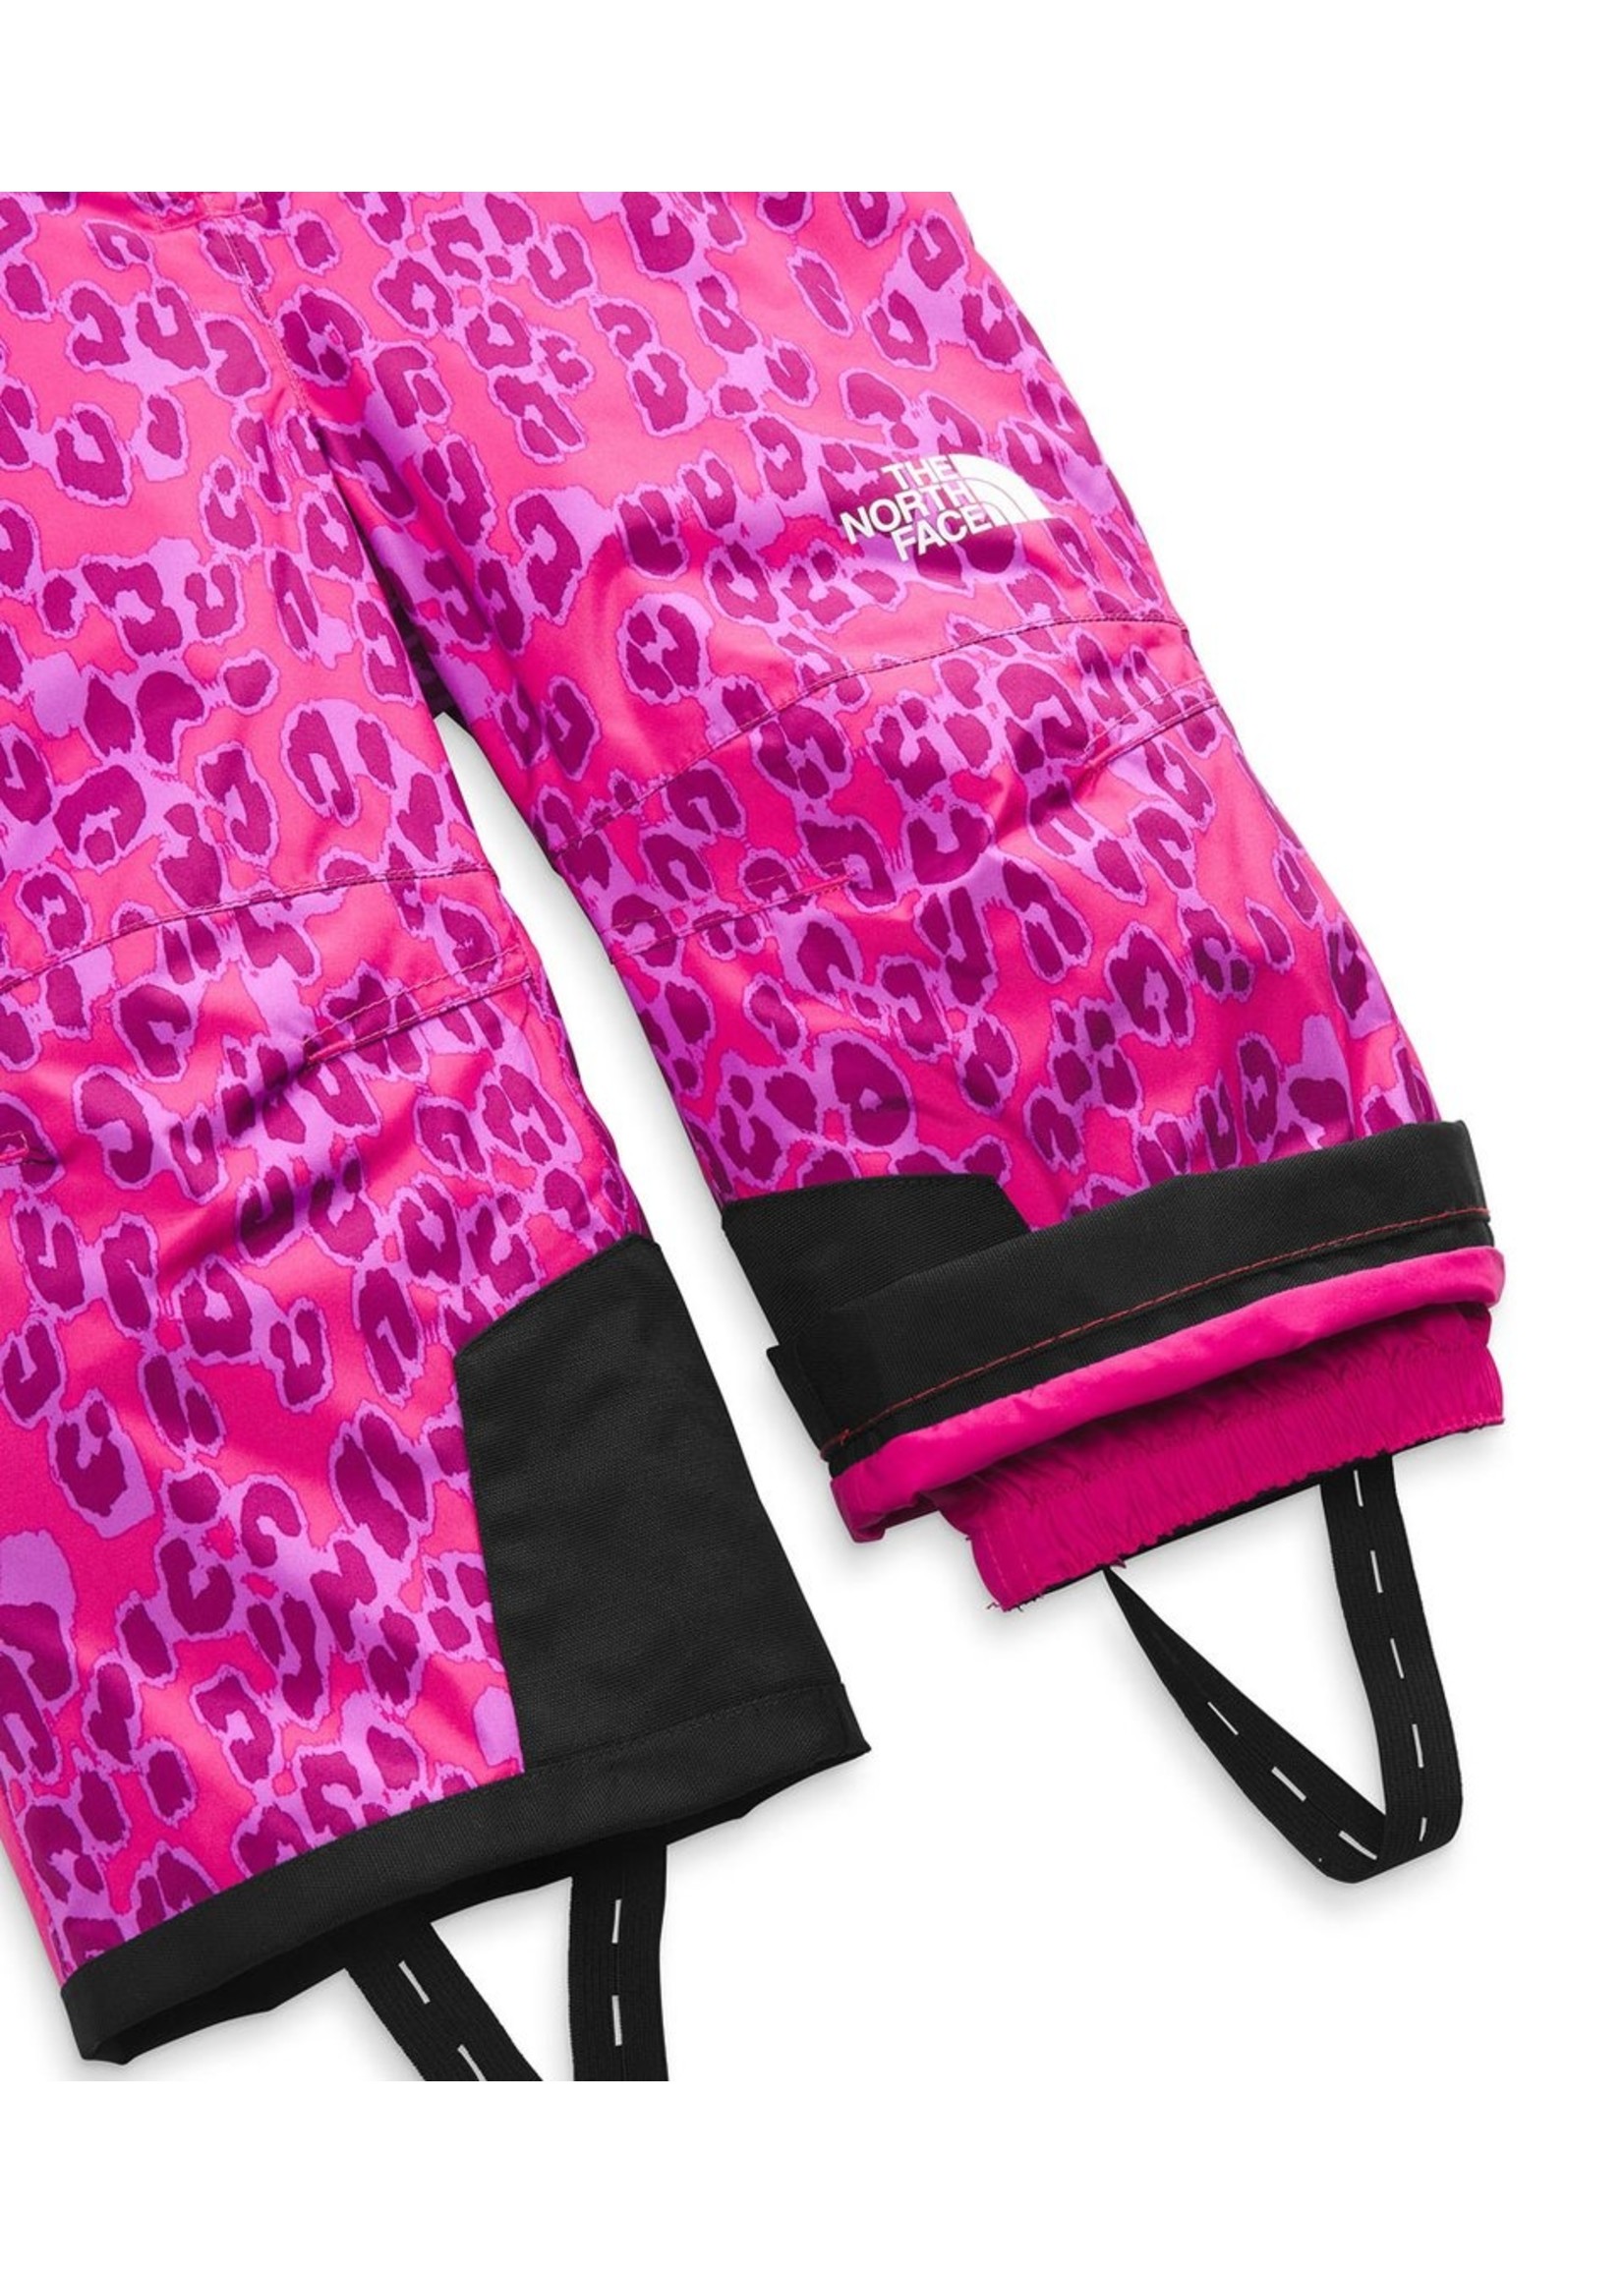 The North Face Toddler Snowquest Insulated Bib - Pink Leopard Print